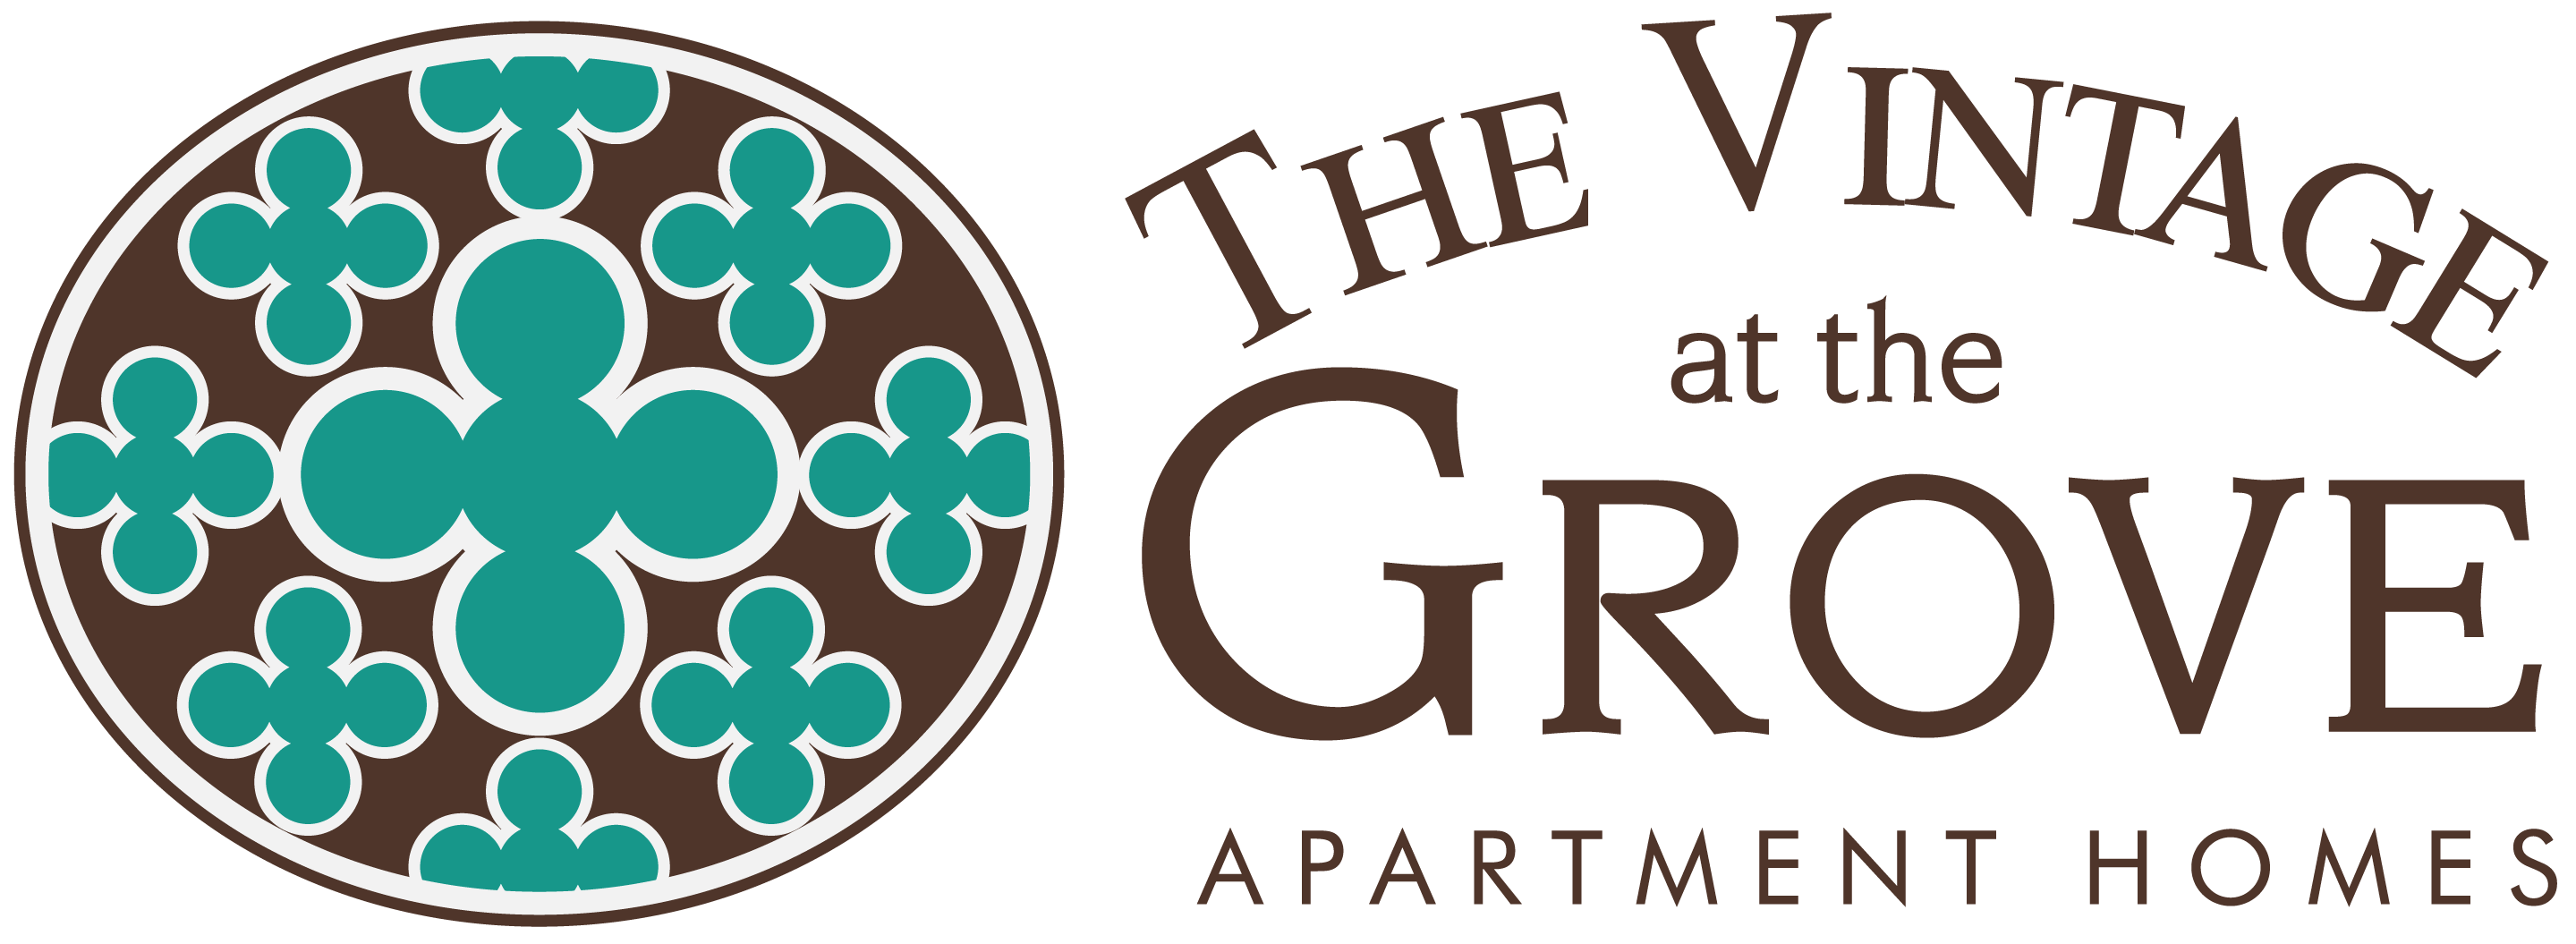 Vintage at the Grove Logo